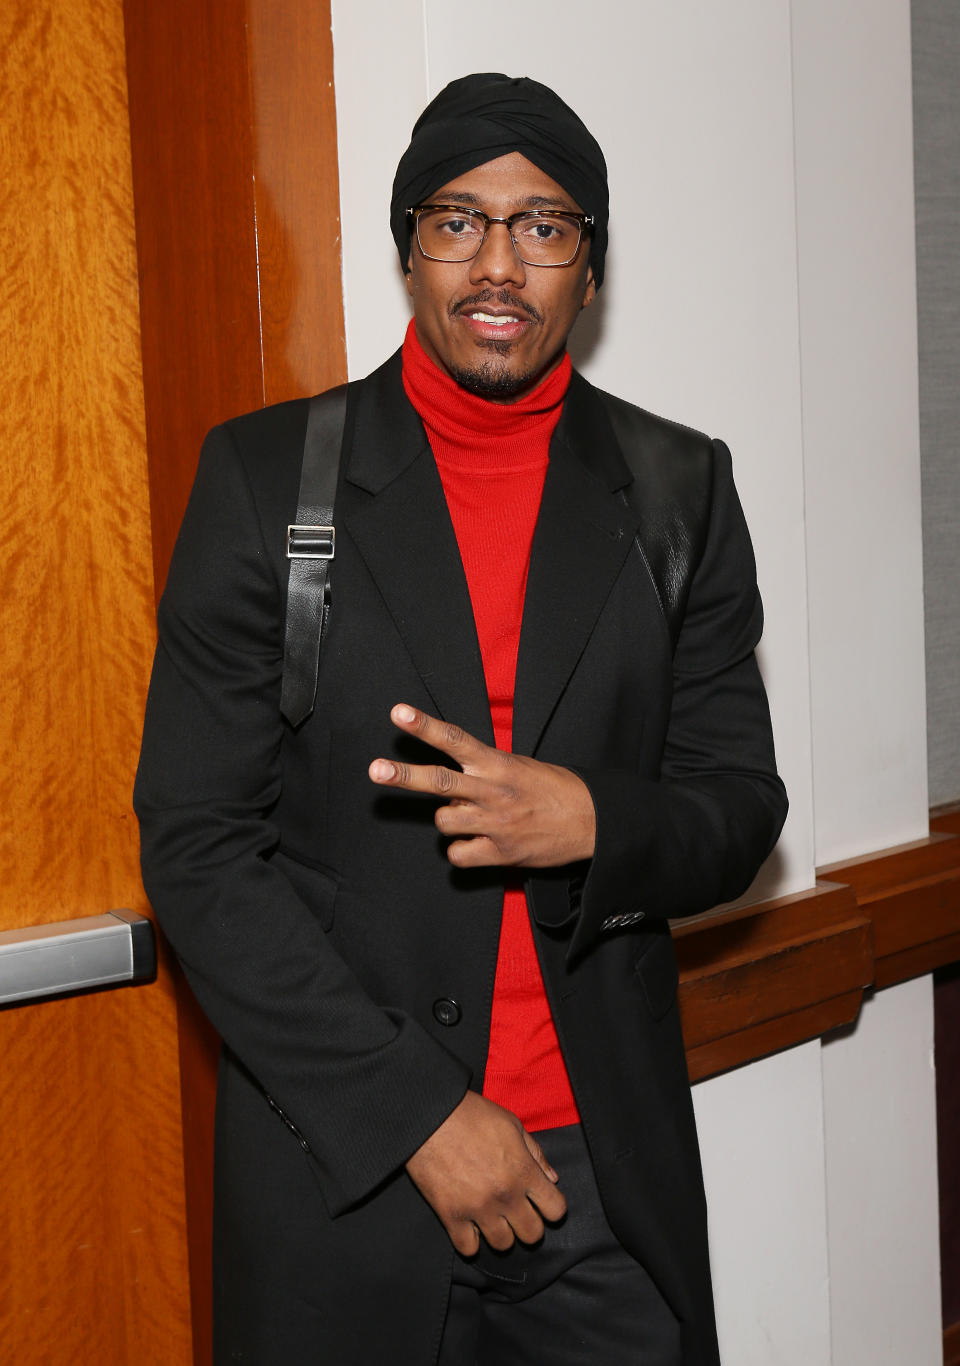 Man in black coat and red turtleneck posing with hand gesture